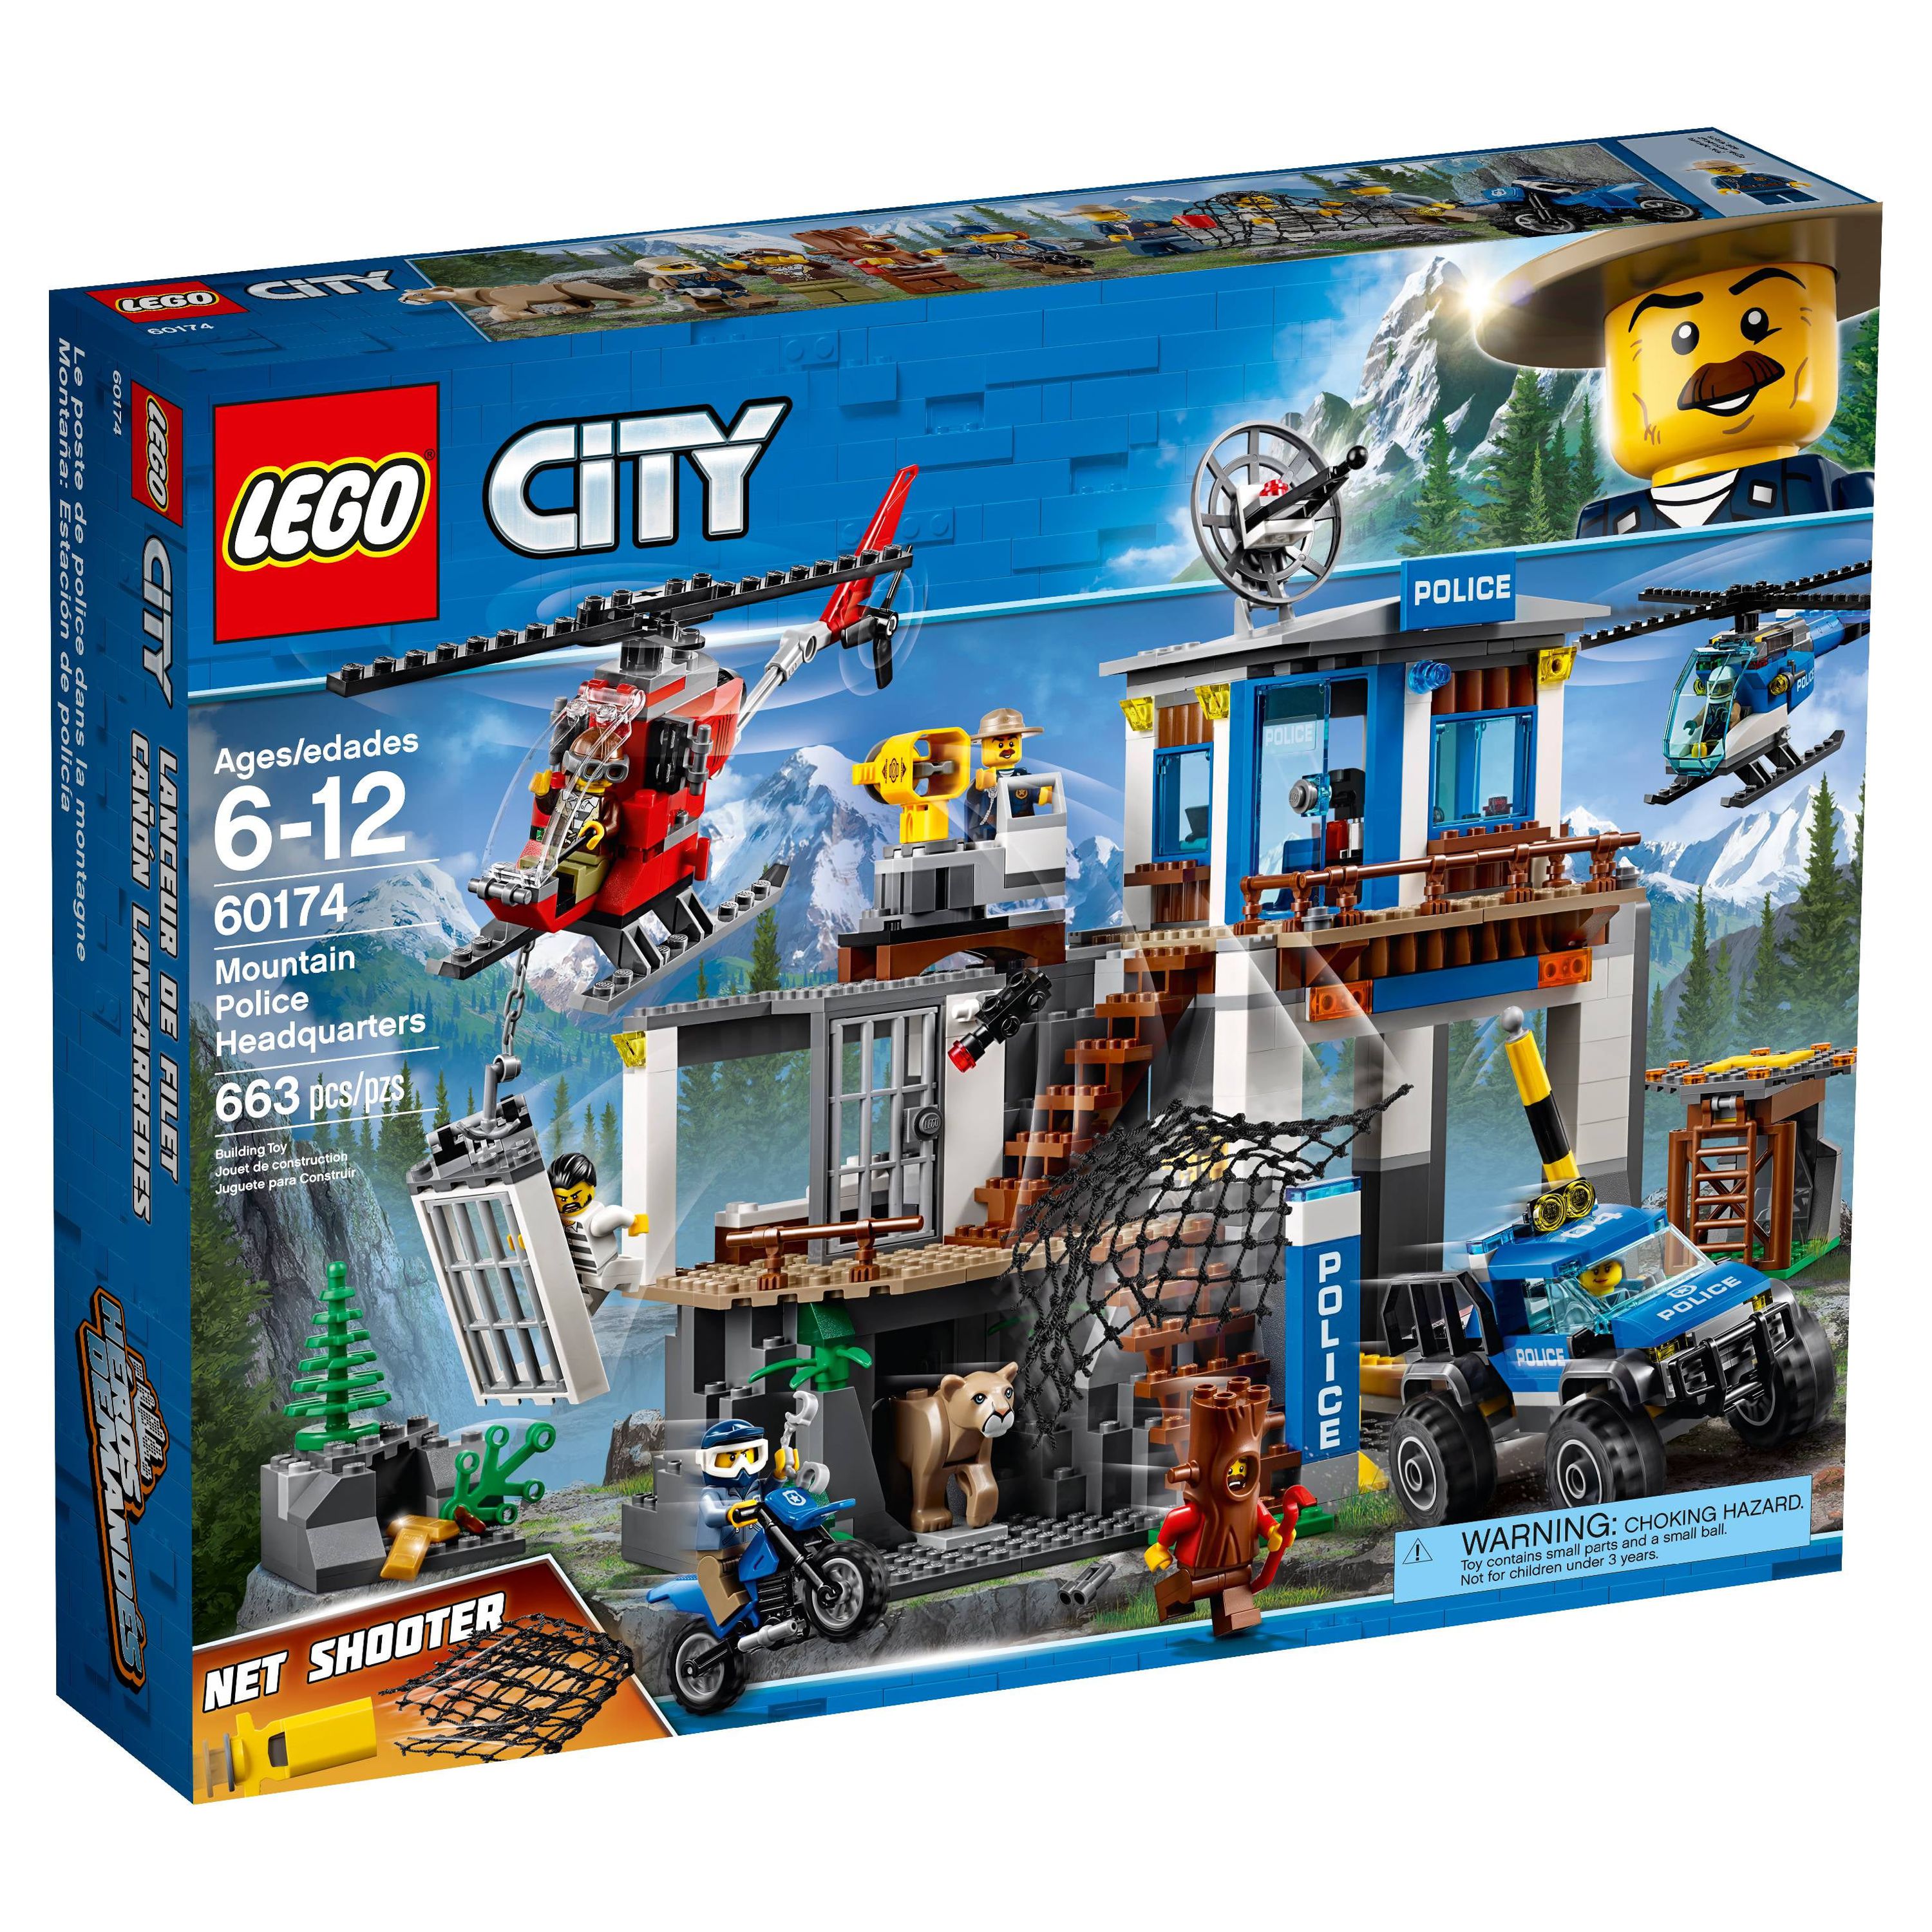 LEGO City Police Mountain Police Headquarters 60174 - image 4 of 7